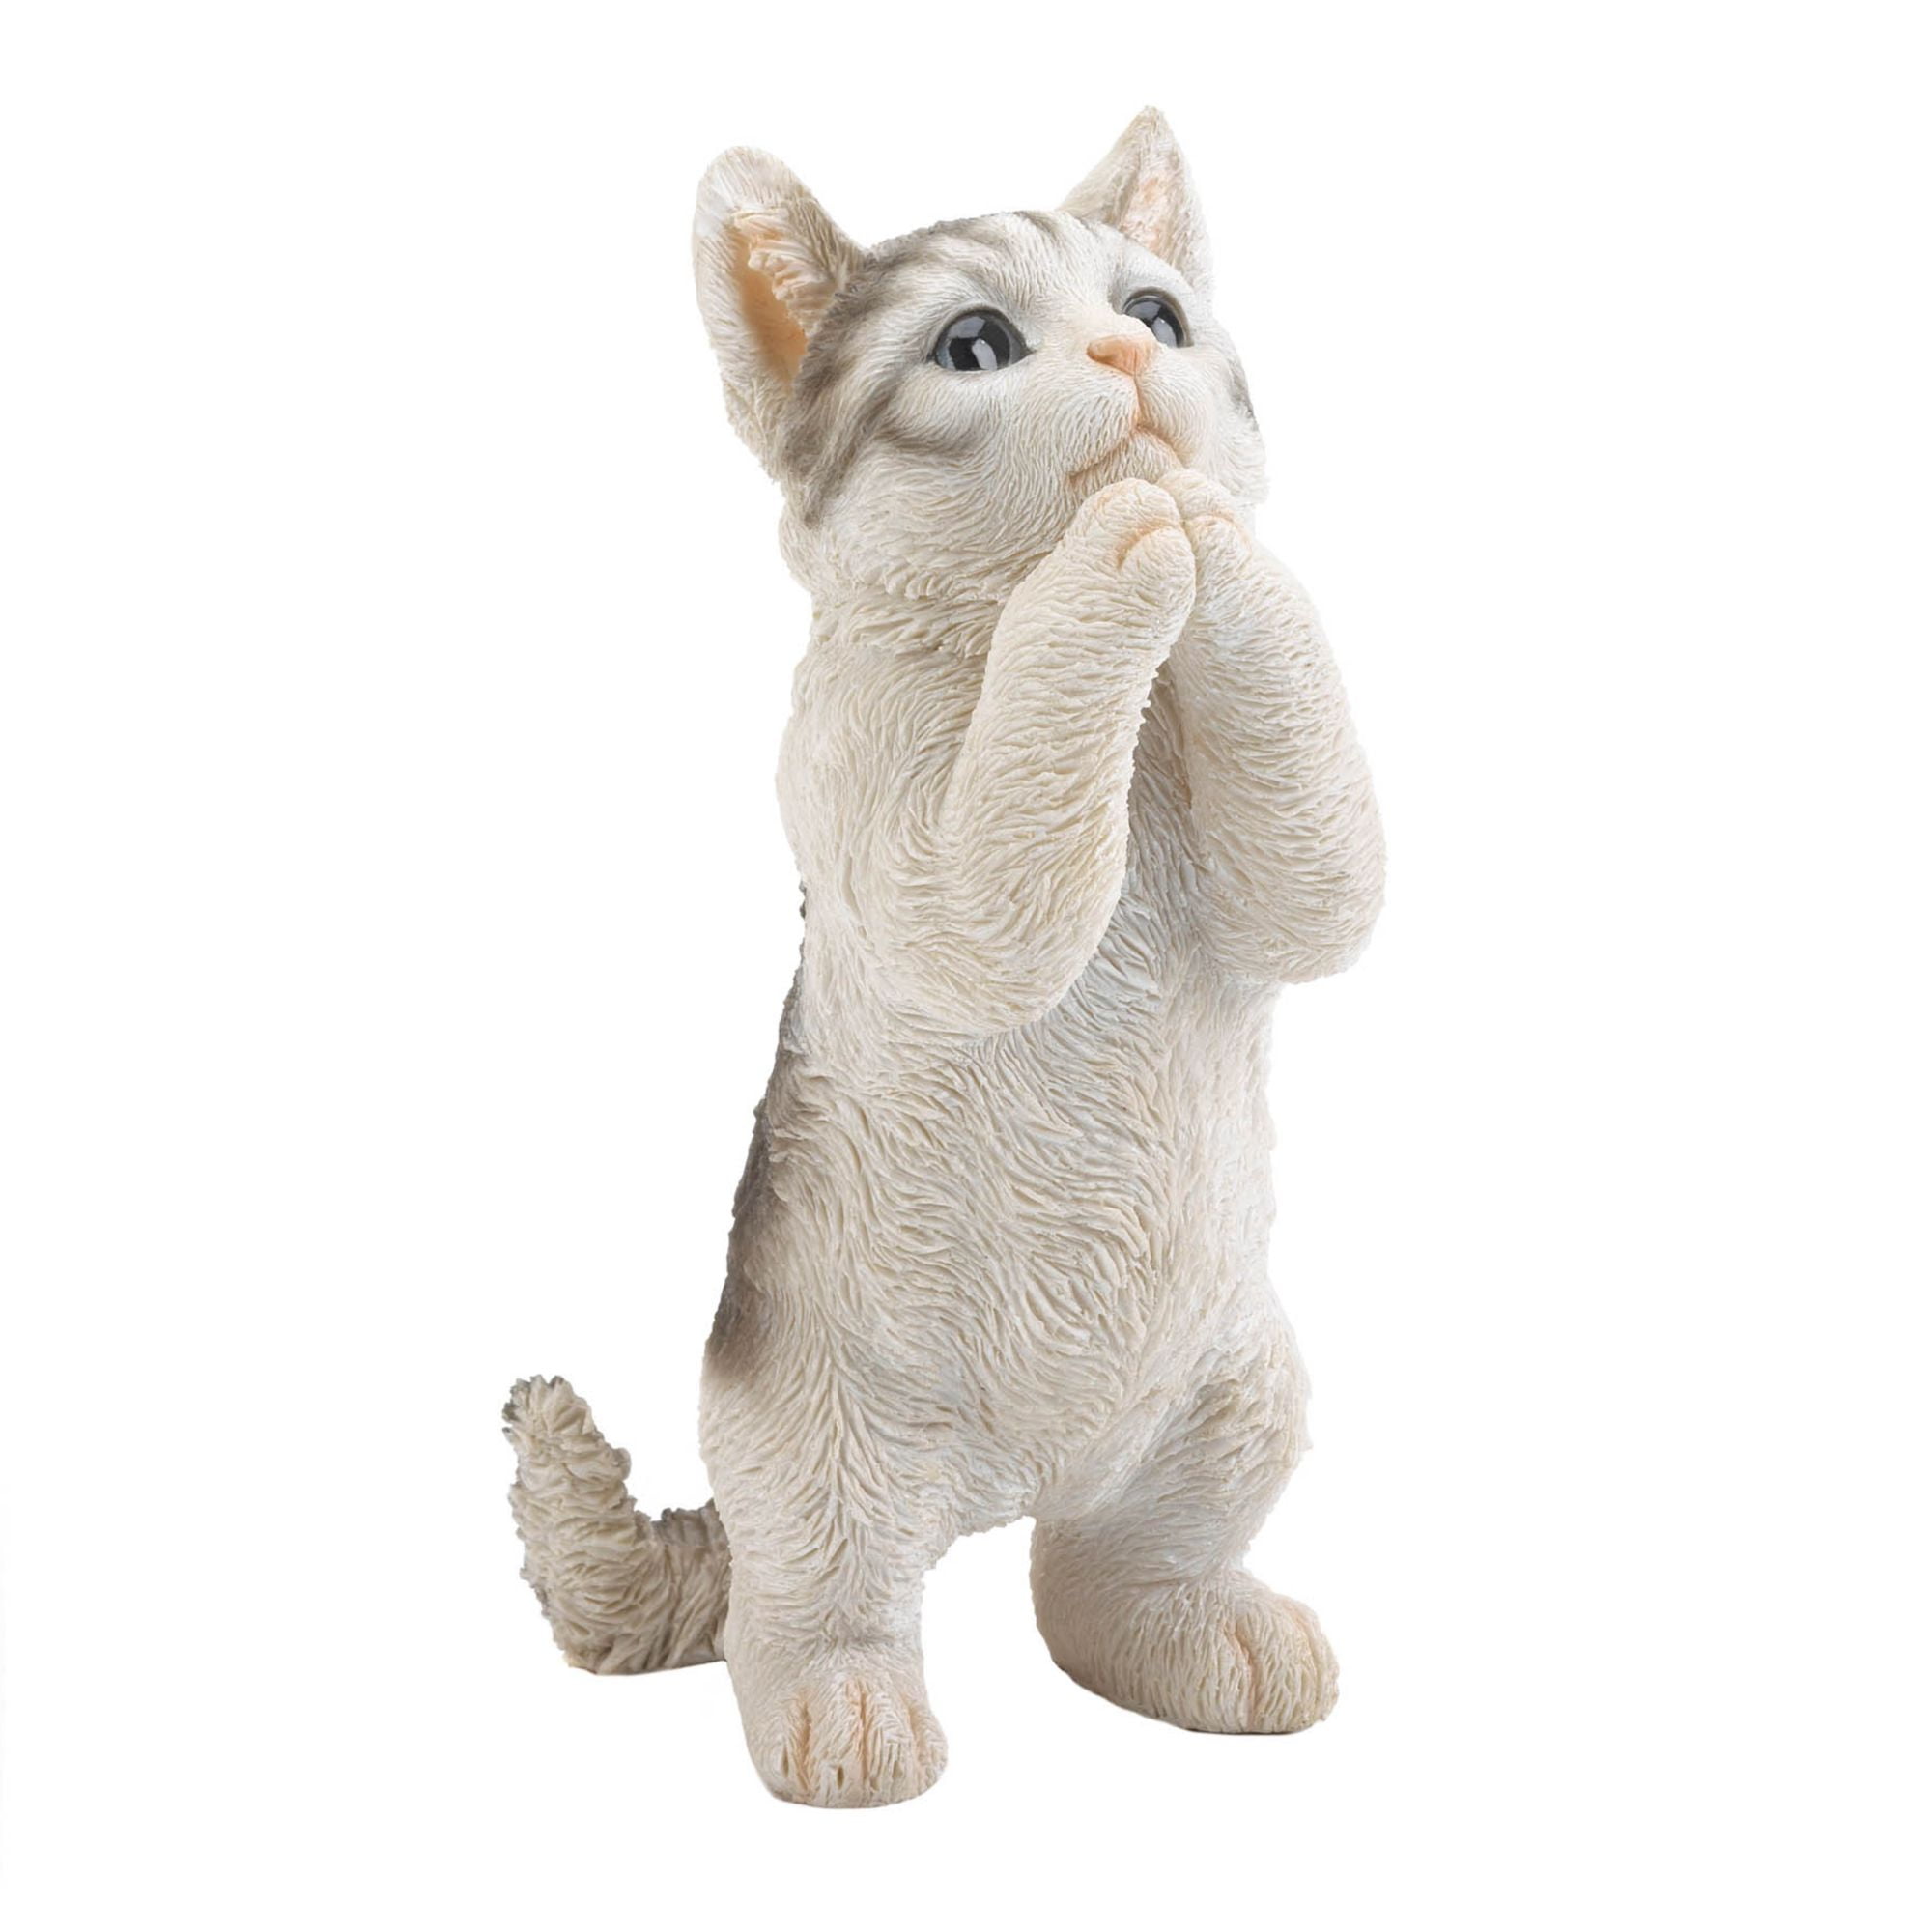 Dolls House Miniature Ceramic Grey Tabby Cat In Standing Position 